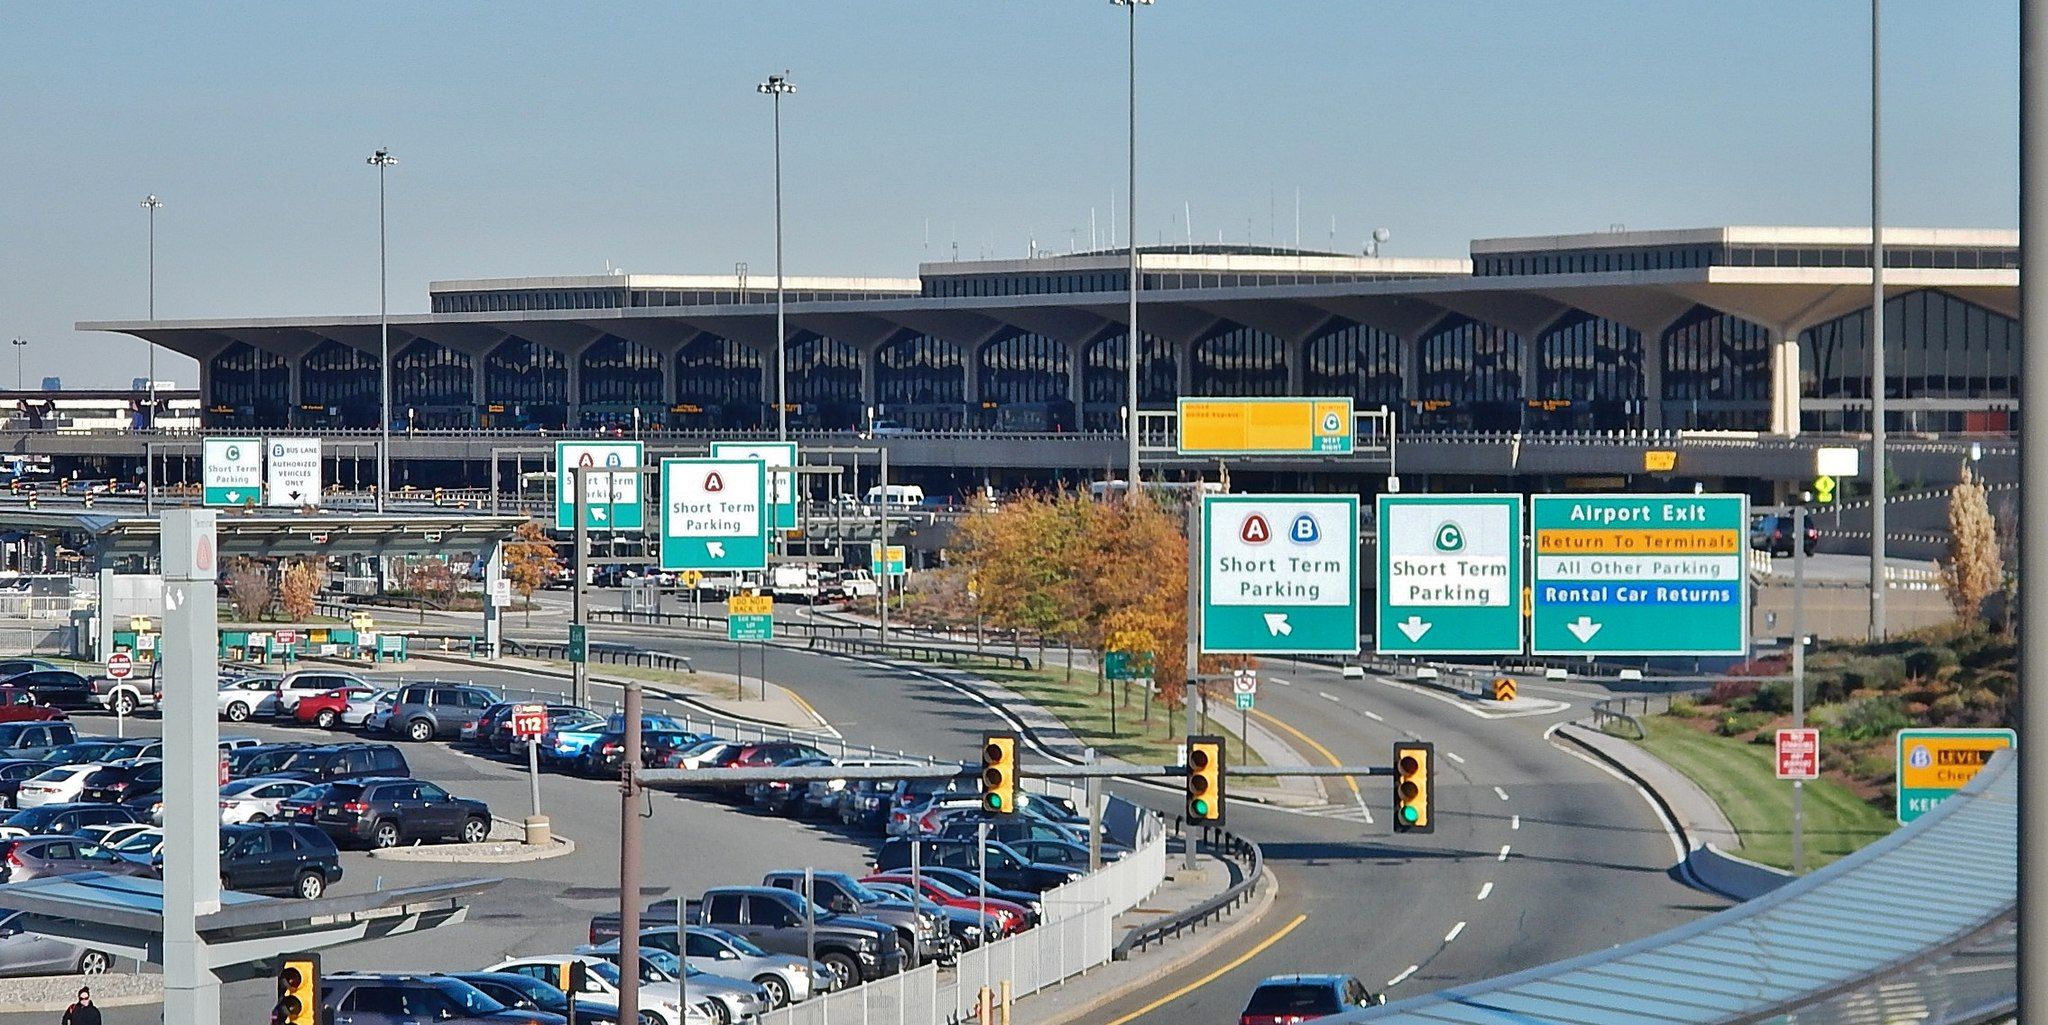 Carpark and roads leading out of Newark Liberty International Airport